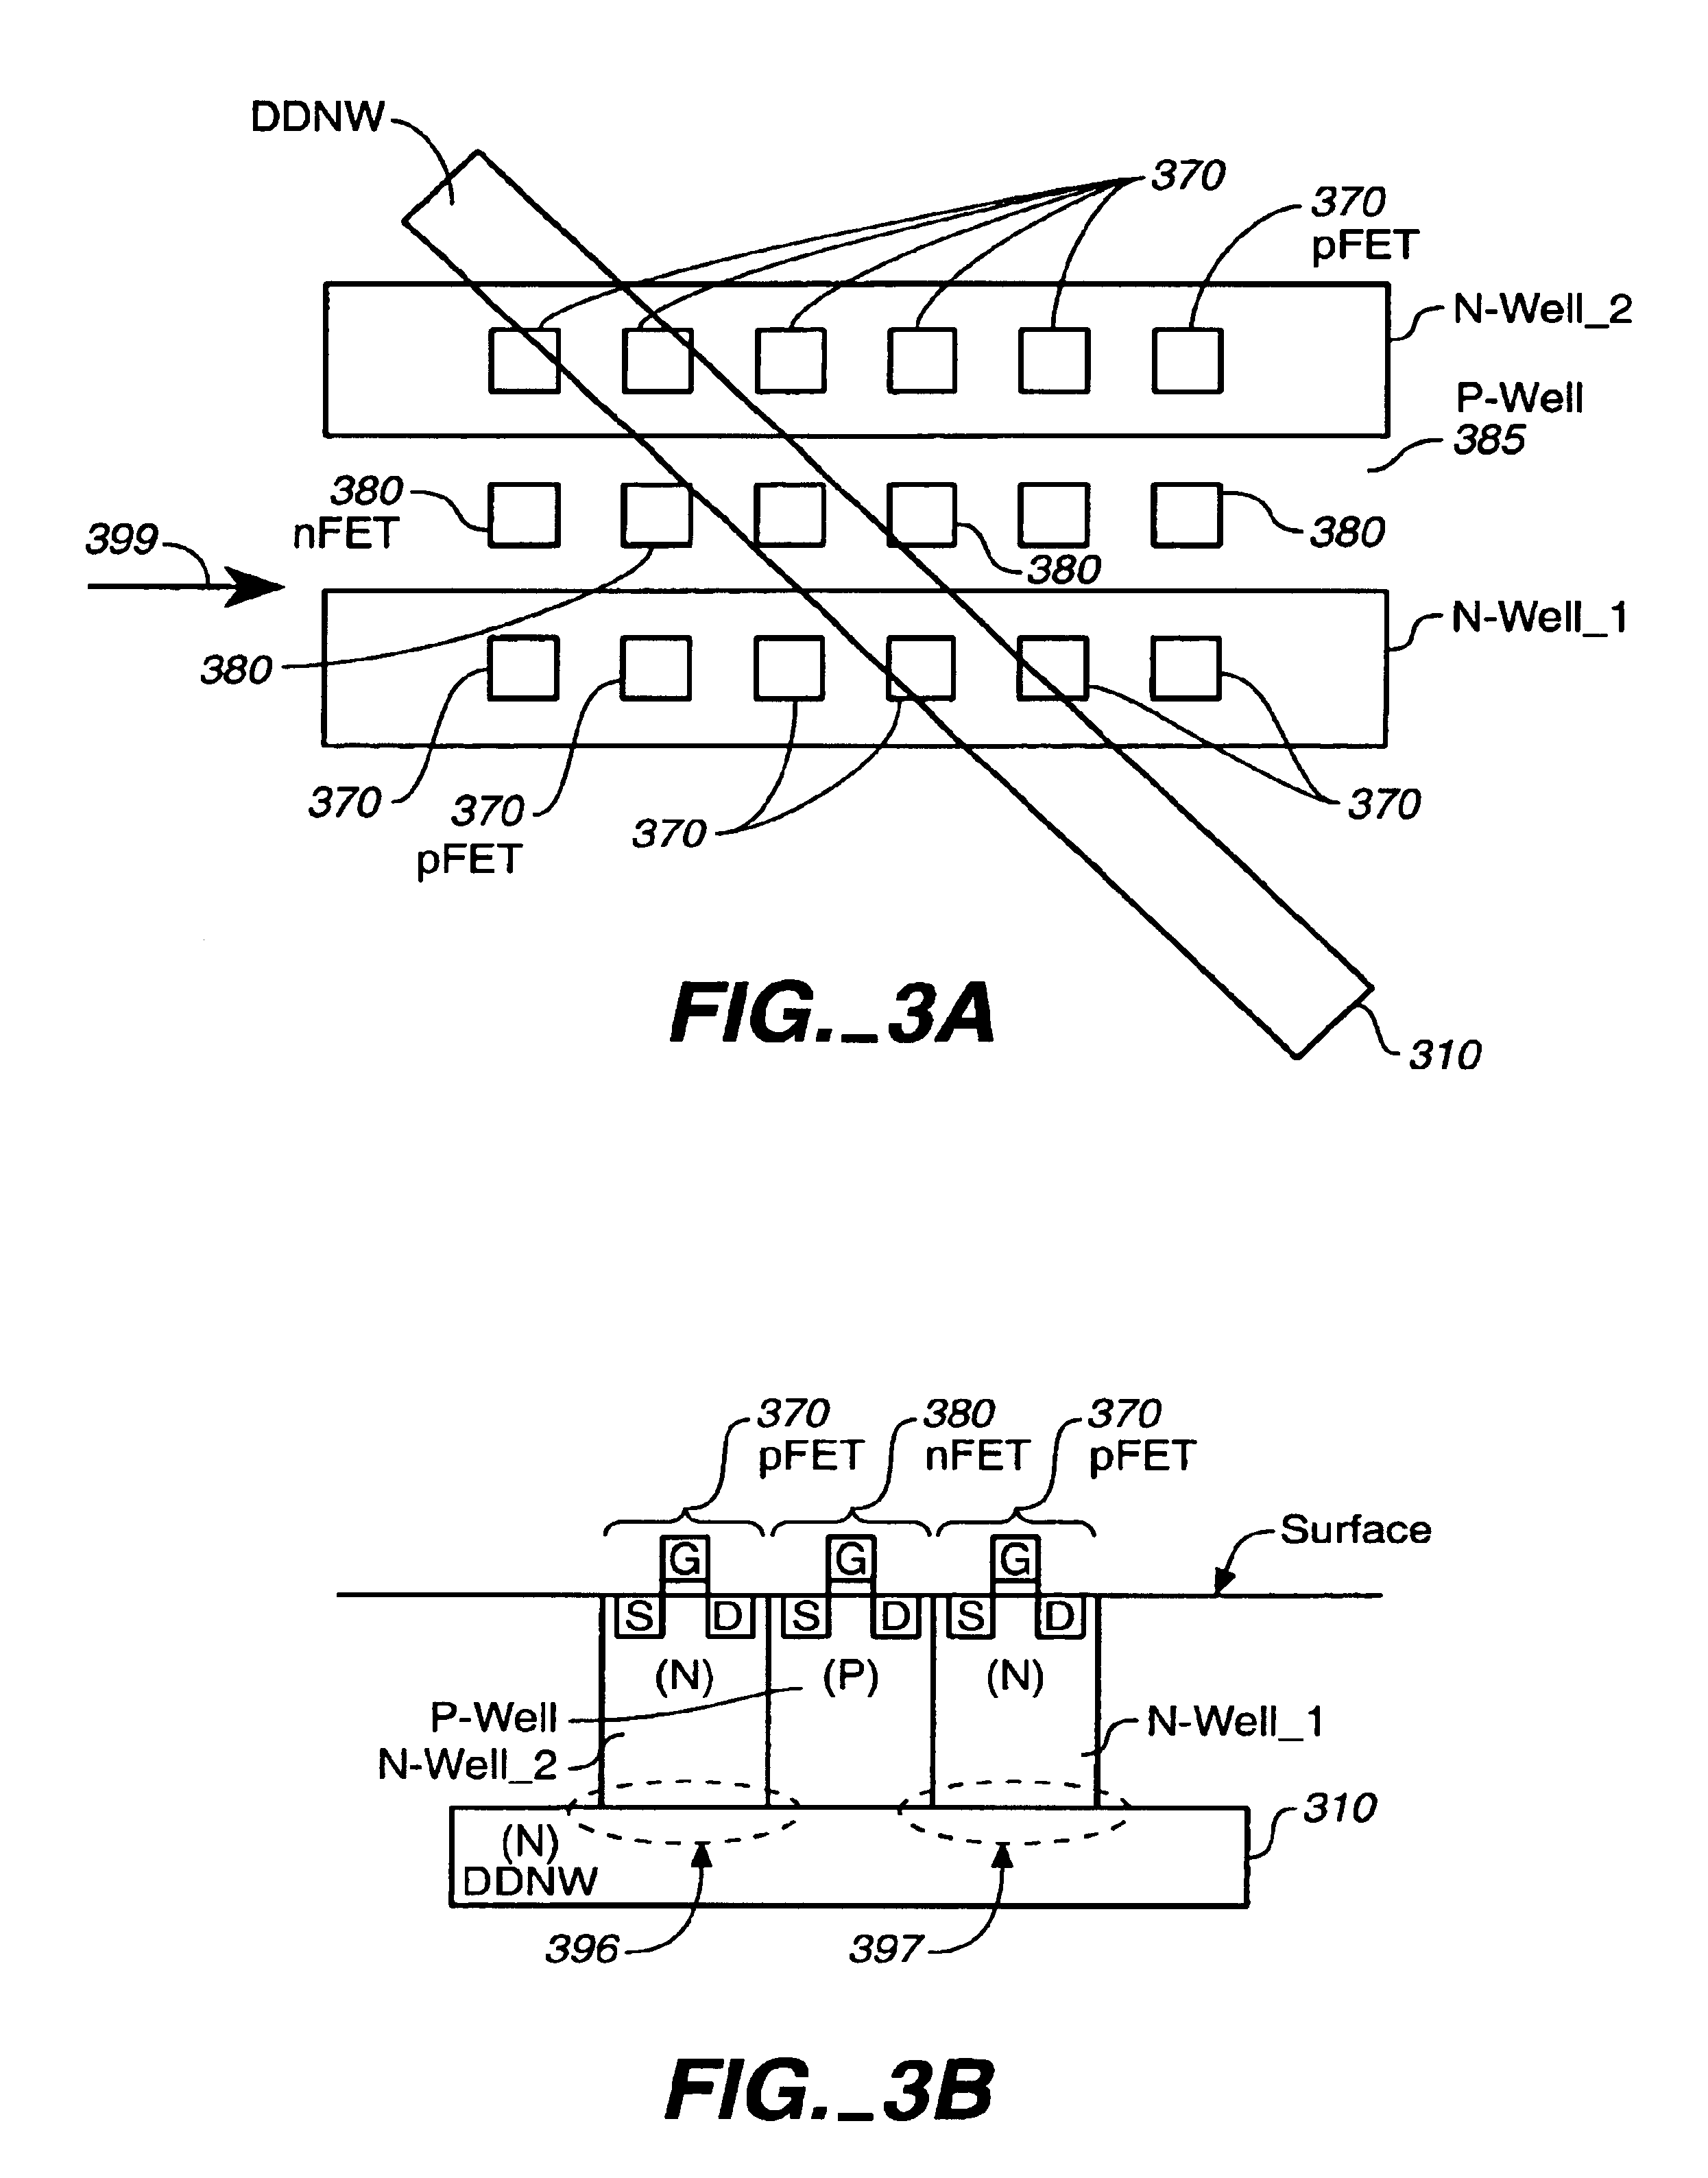 Diagonal deep well region for routing body-bias voltage for MOSFETS in surface well regions